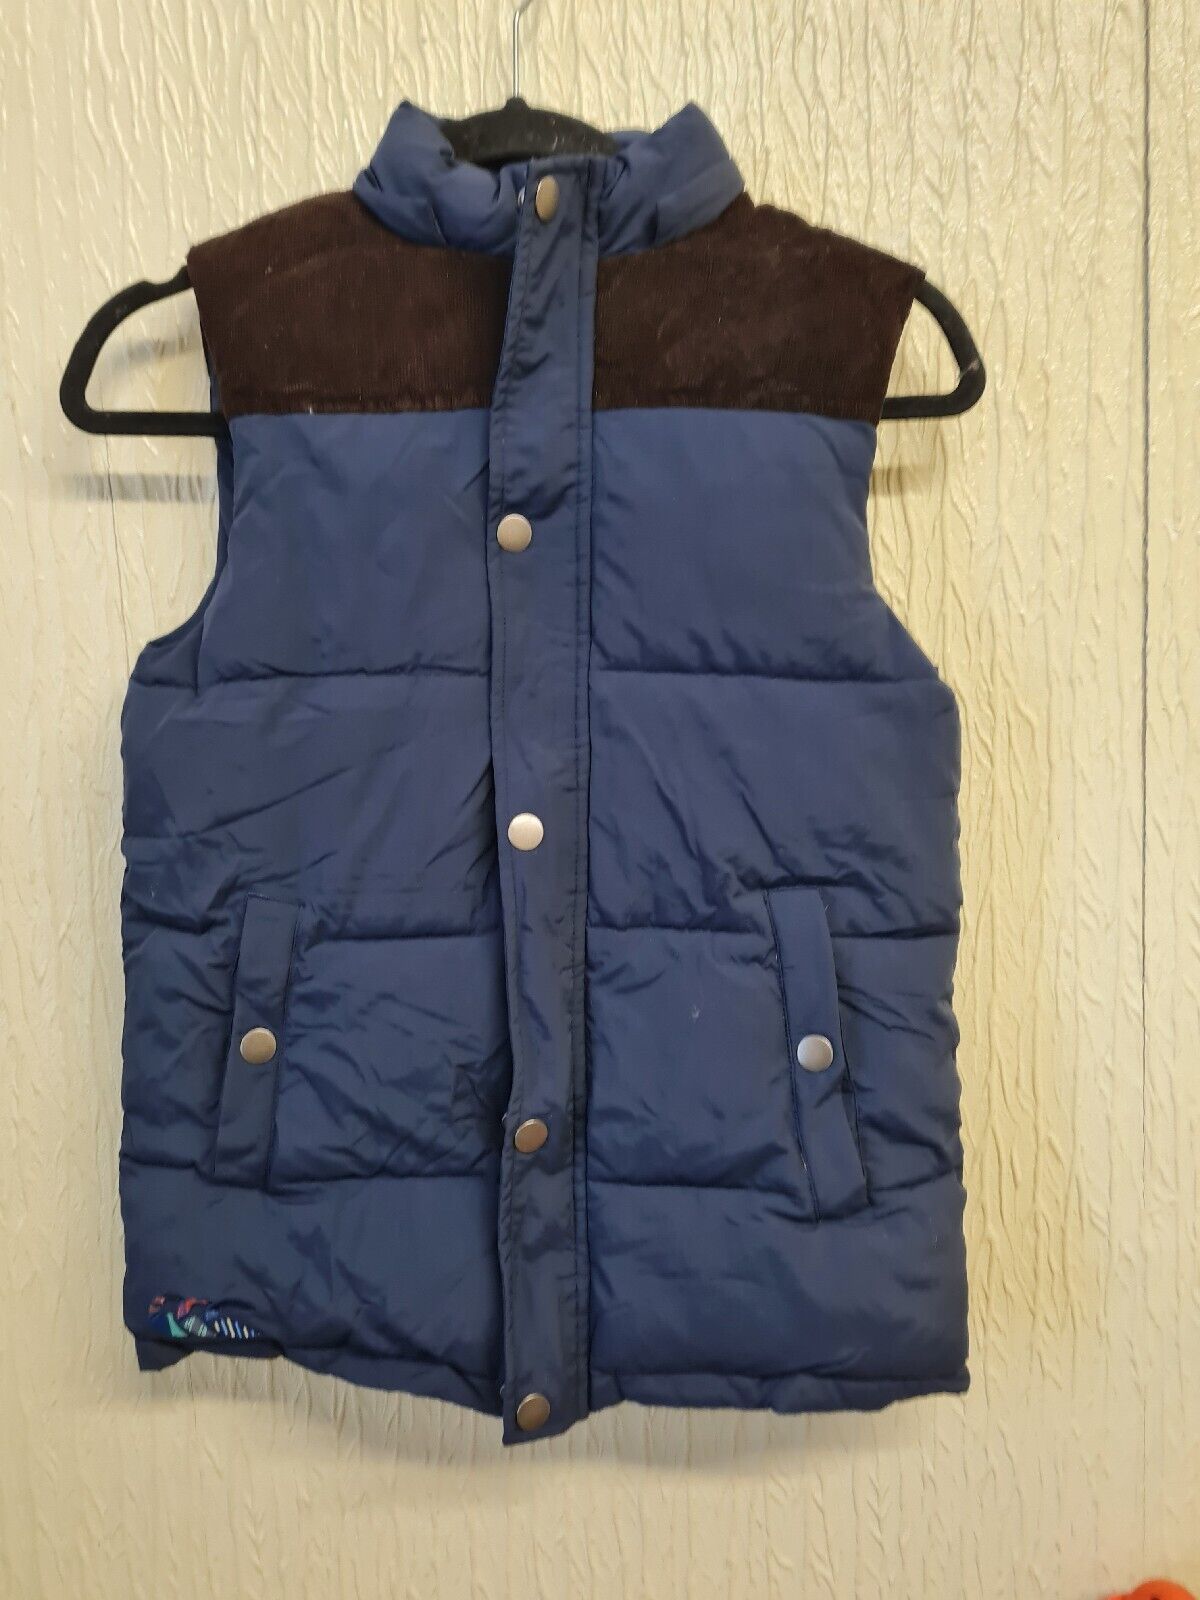 Primary image for Canterbury Navy Blue Sleeveless Jacket For Boys Size 12yrs Express Shipping